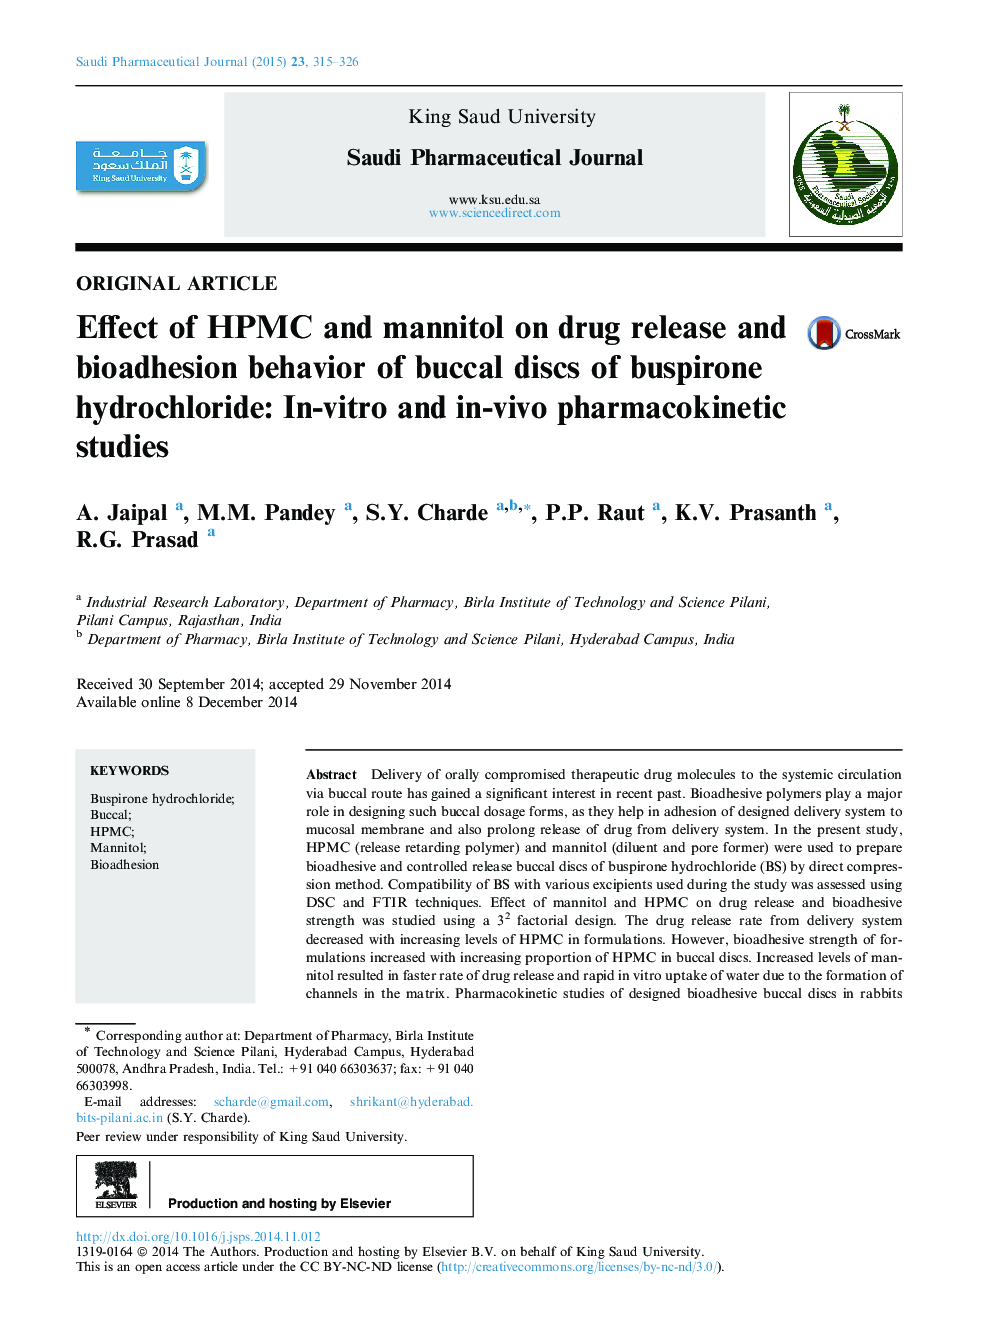 Effect of HPMC and mannitol on drug release and bioadhesion behavior of buccal discs of buspirone hydrochloride: In-vitro and in-vivo pharmacokinetic studies 